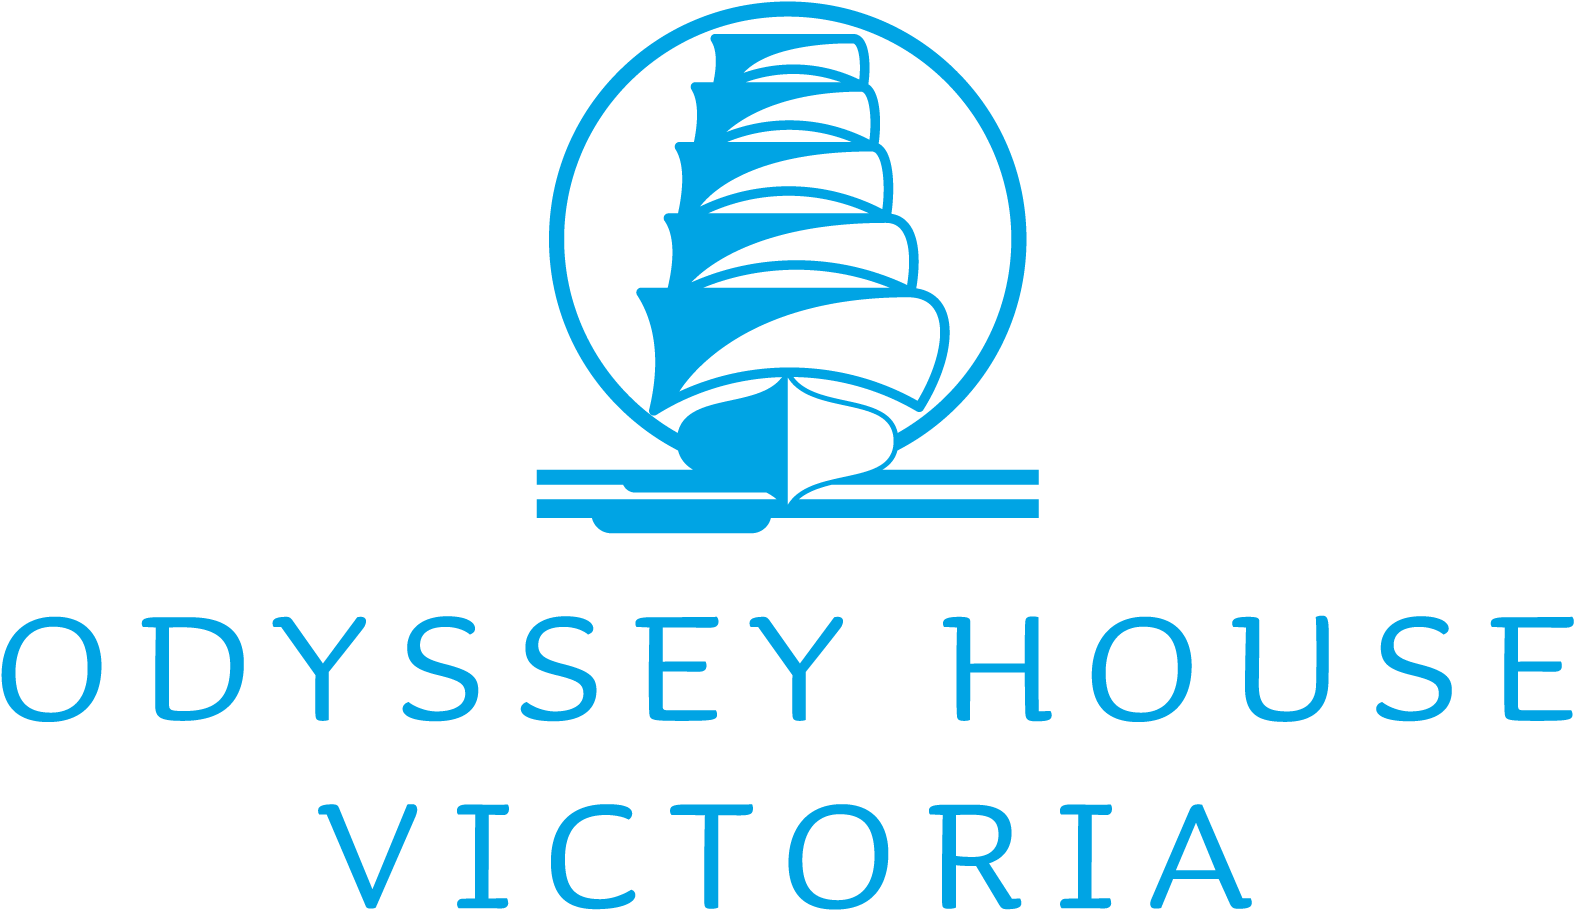 Youth & Family Services - Odyssey House Victoria (1800x961)